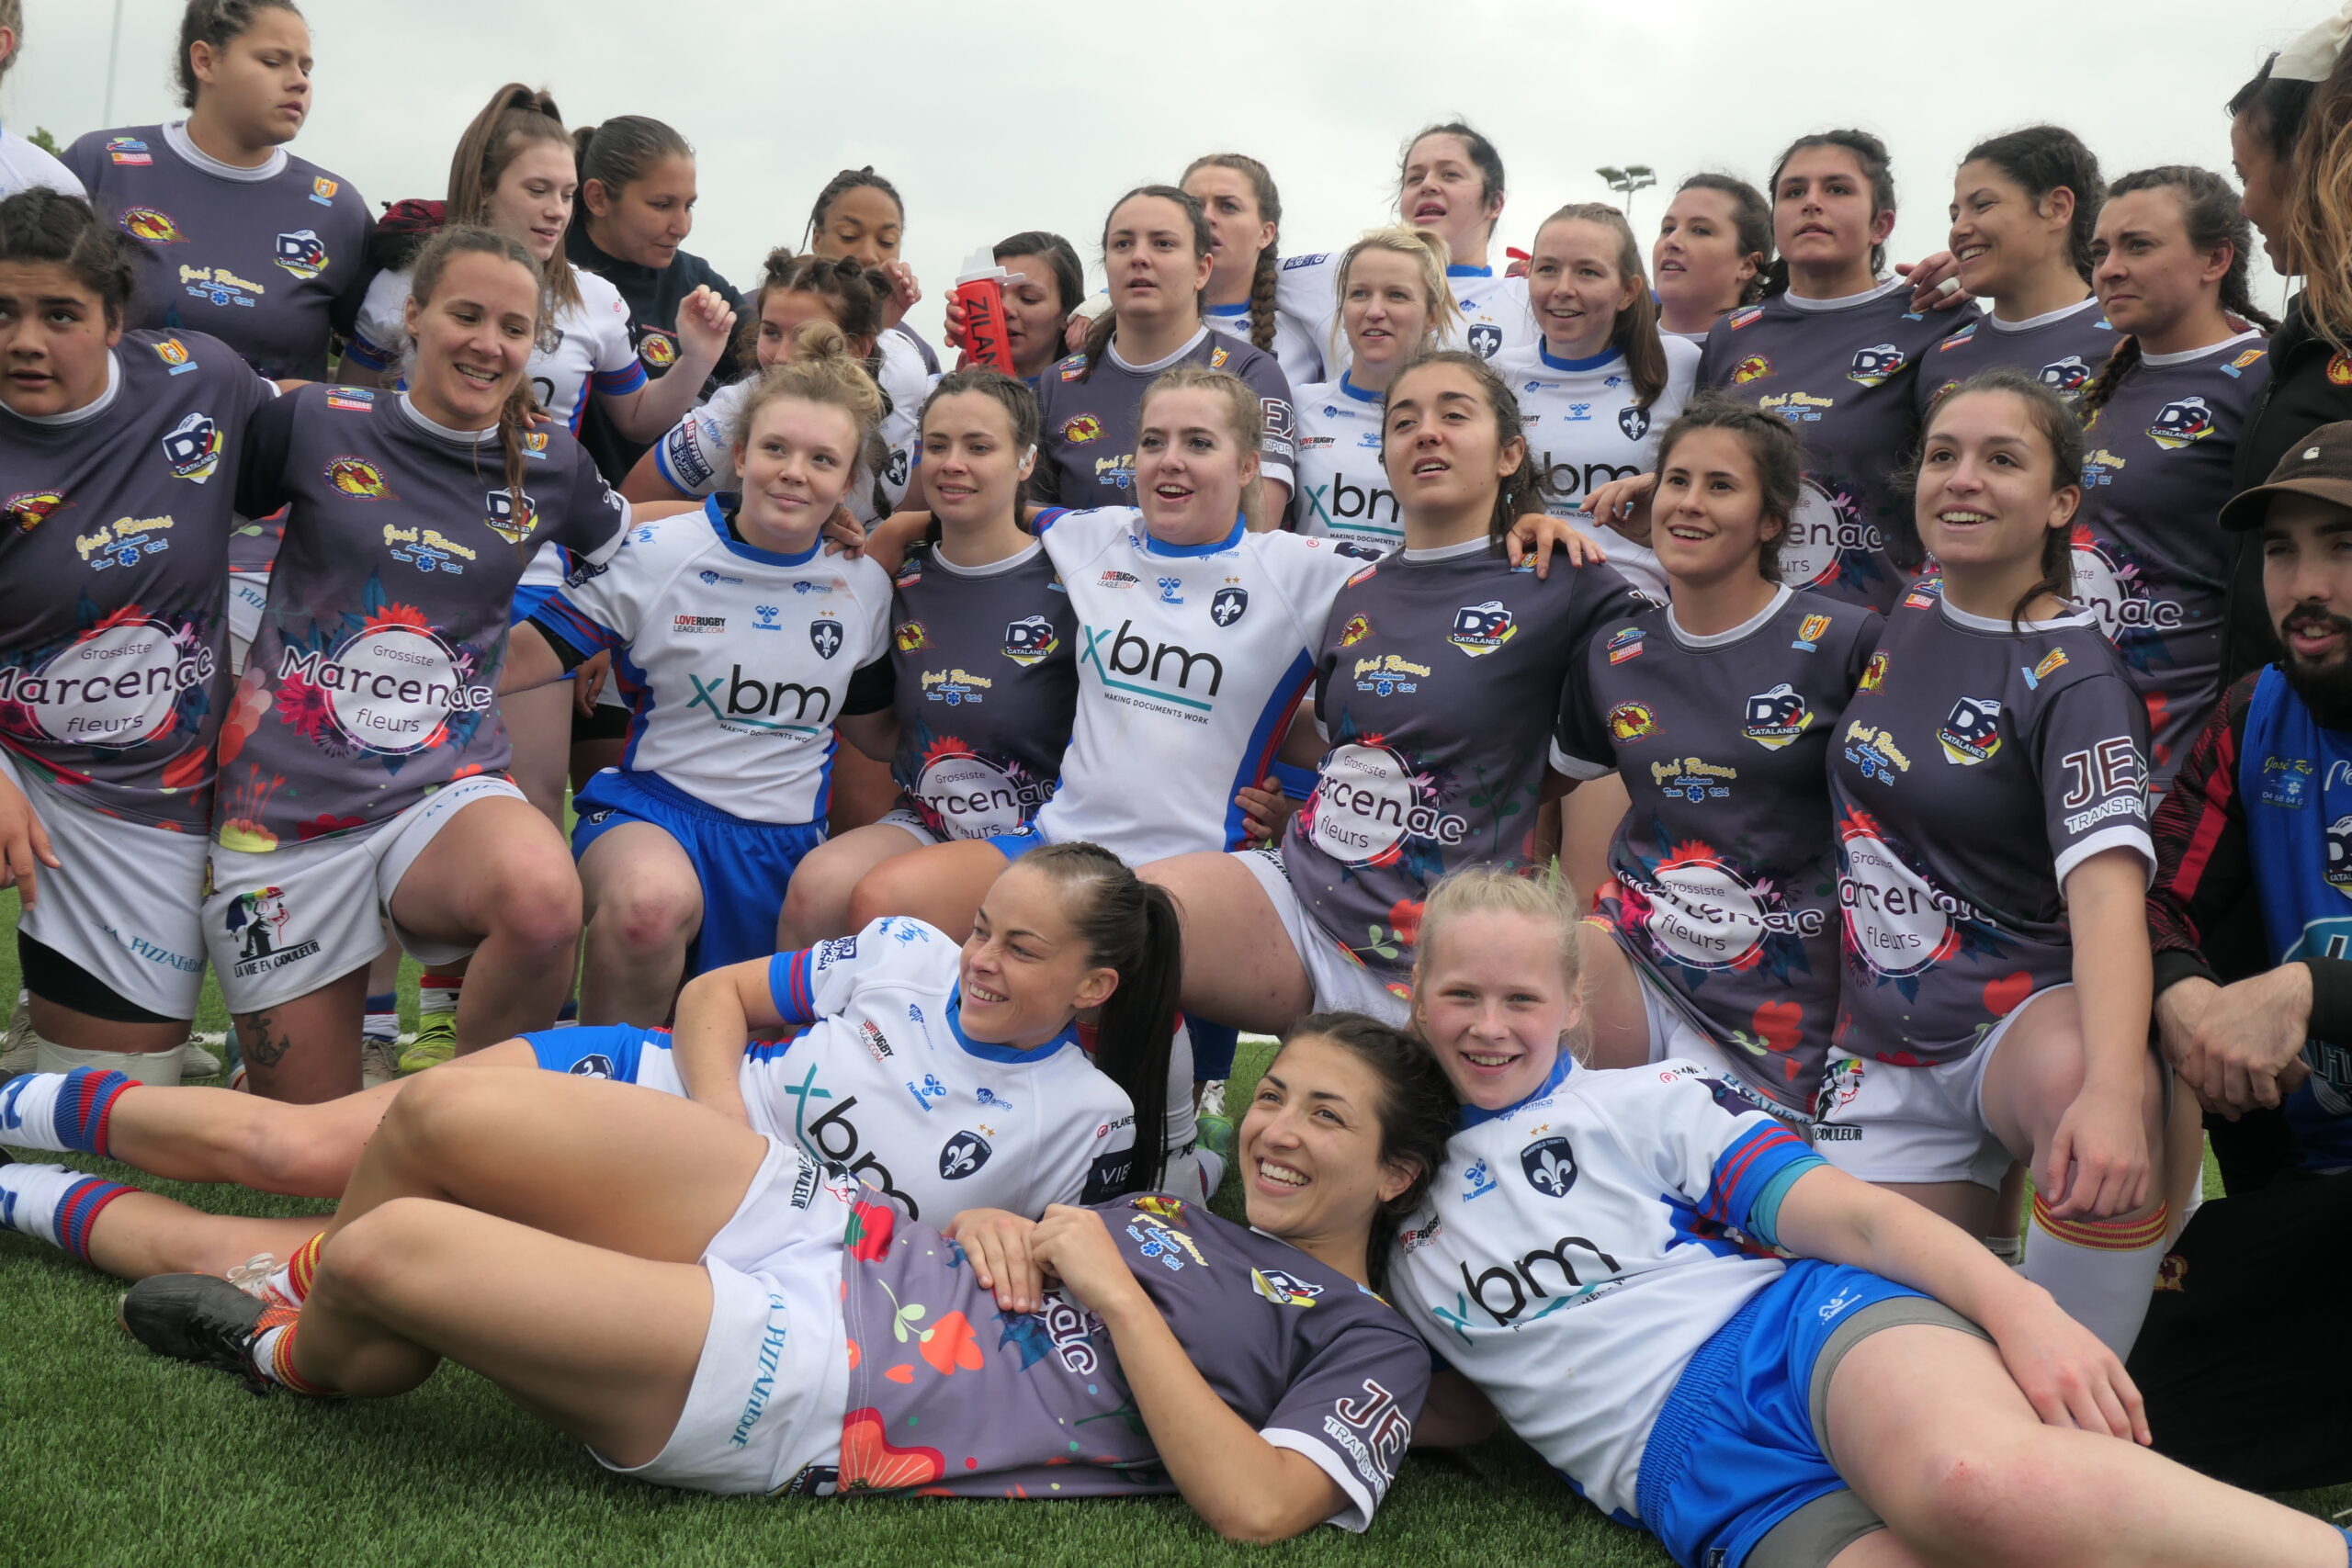 Breaking: Women’s rugby league in Britain and France takes first step towards professionalism